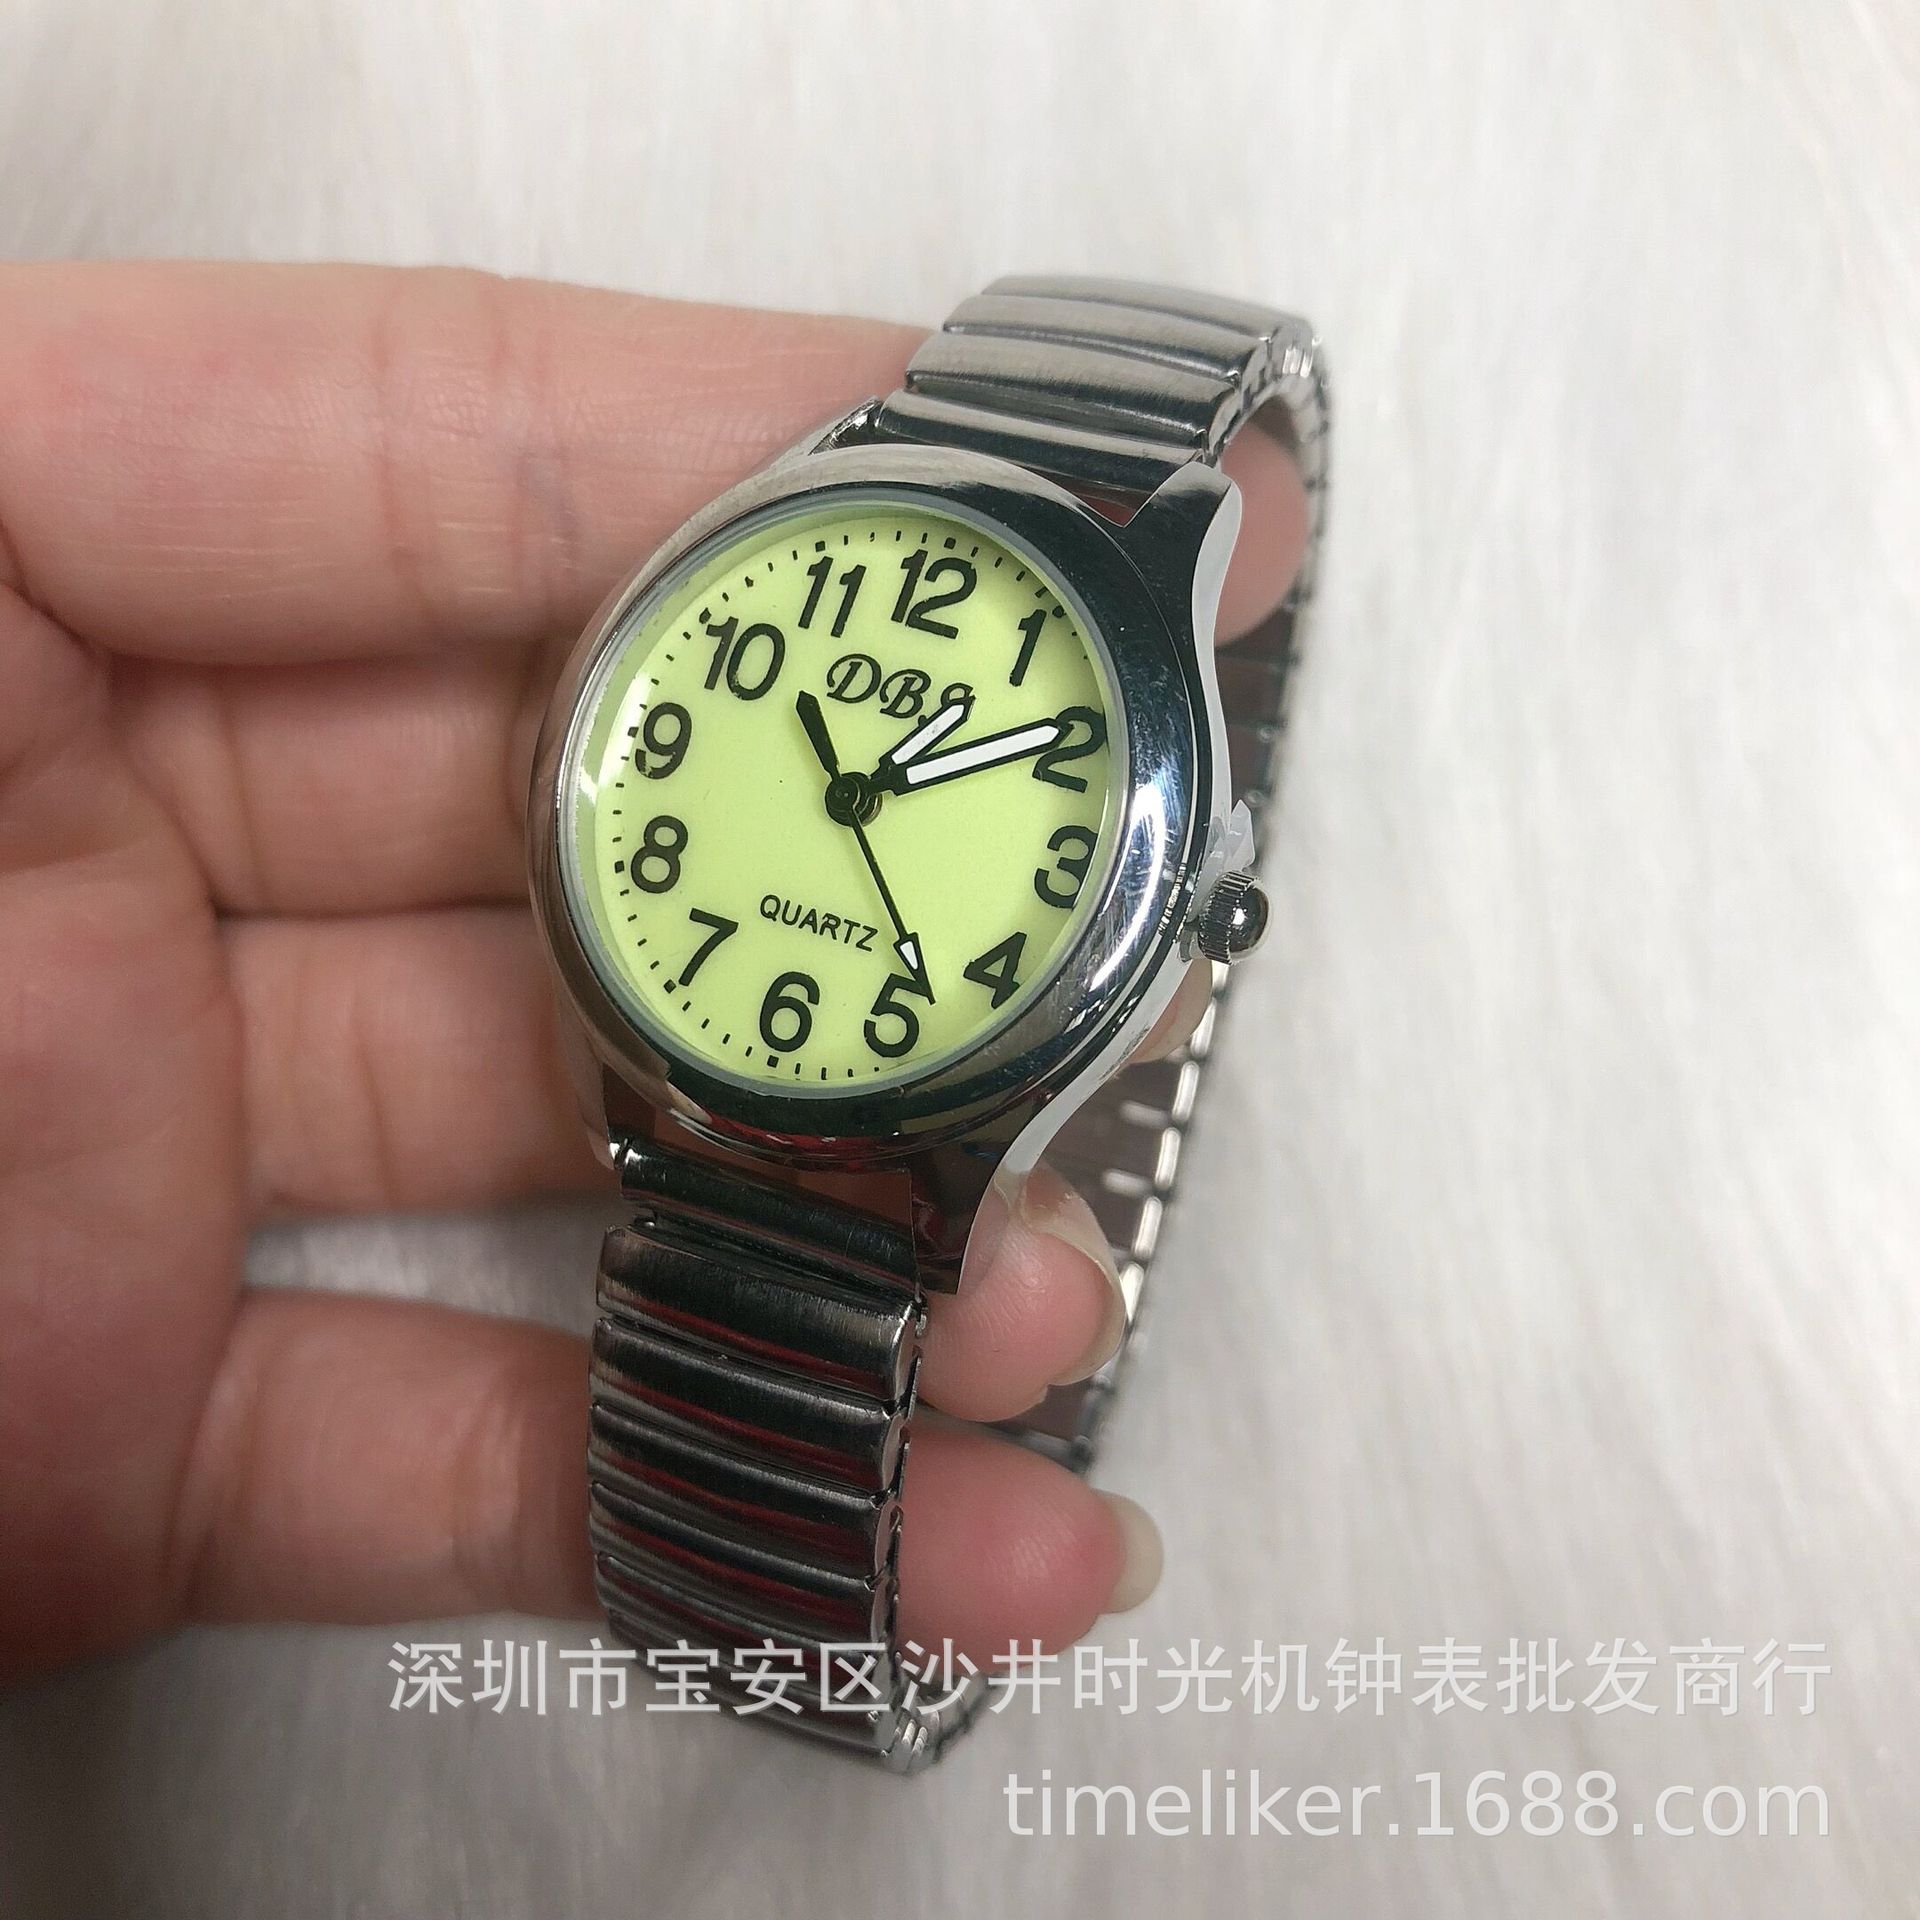 Waterproof Digital Face Large Dial Elastic Band Watch for the Elderly Wholesale Couple Watches Men's and Women's Quartz Watch in Stock